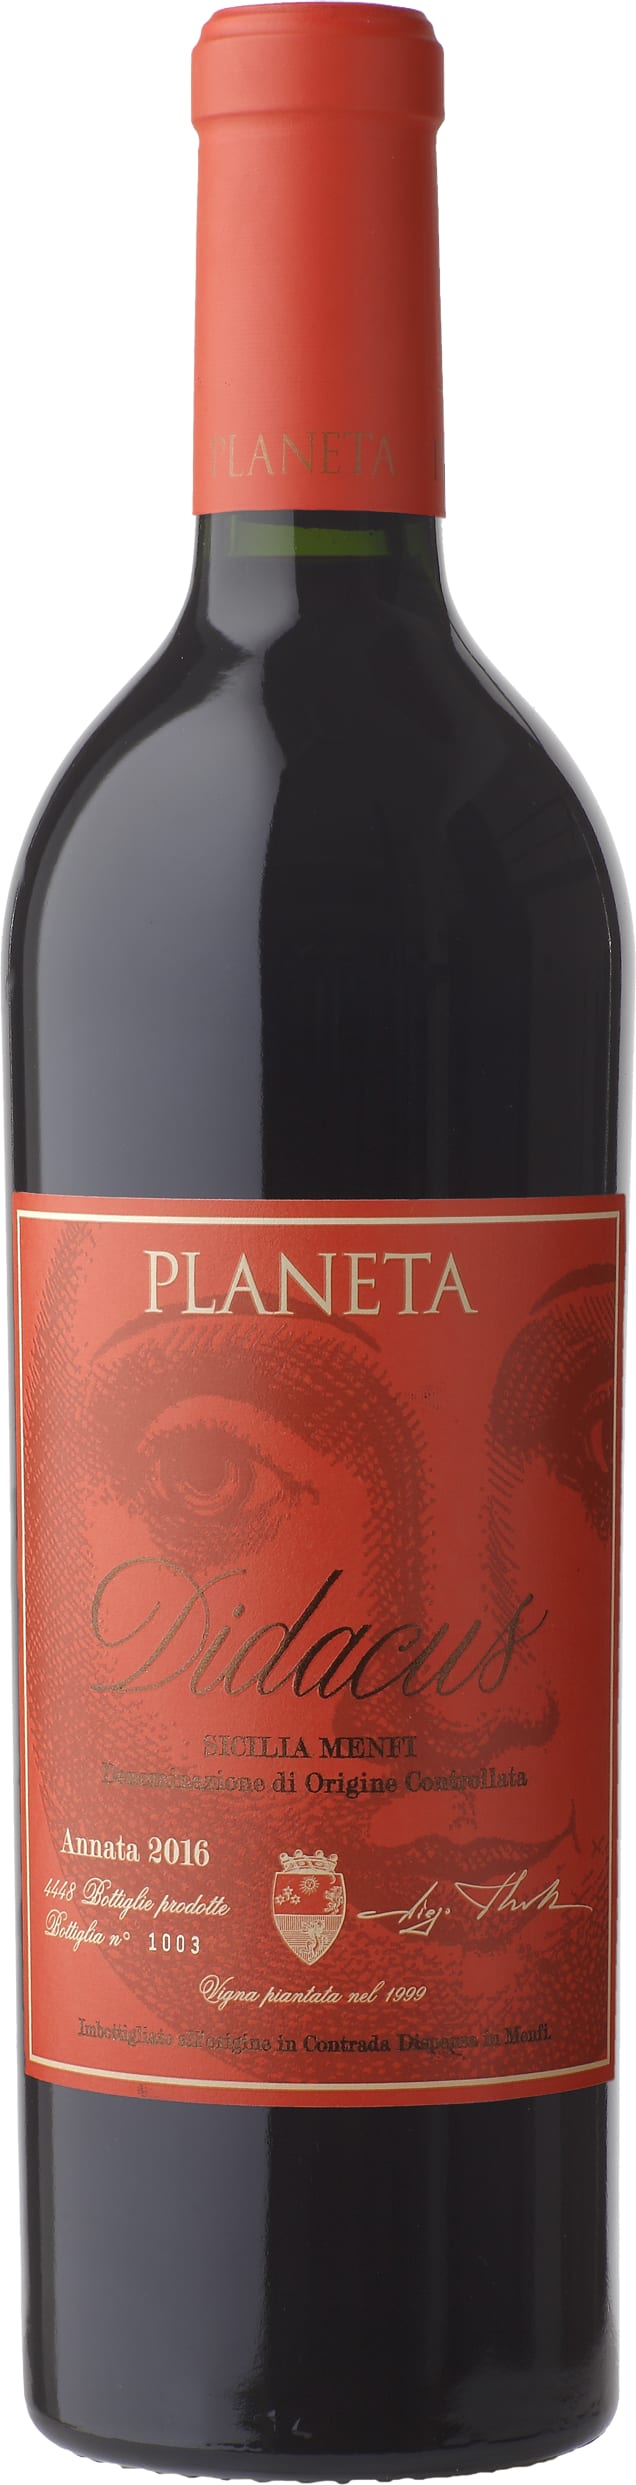 Planeta Didacus Cabernet Franc 2016 75cl - Buy Planeta Wines from GREAT WINES DIRECT wine shop